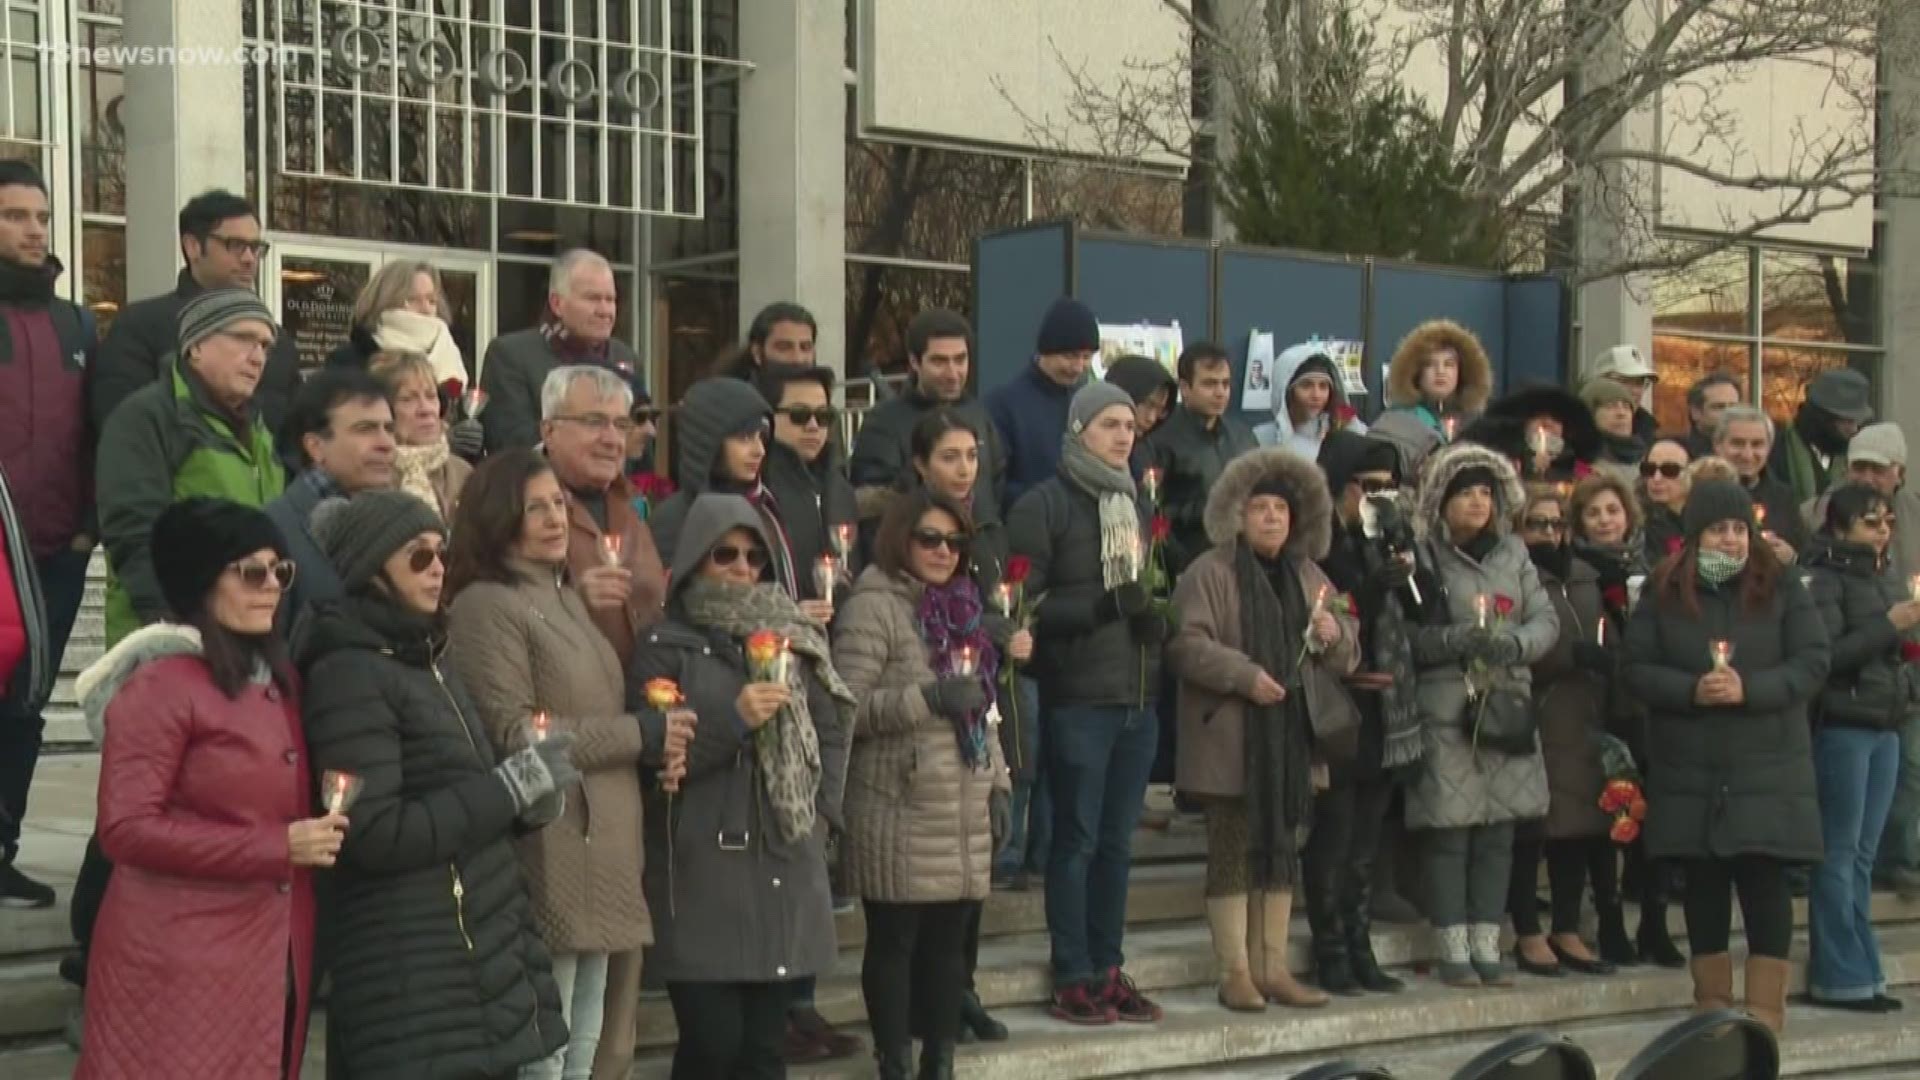 13News Now Angelo Vargas has more on the memorial that ODU students with the Persian Students International Association held for victims of the Tehran plane crash.